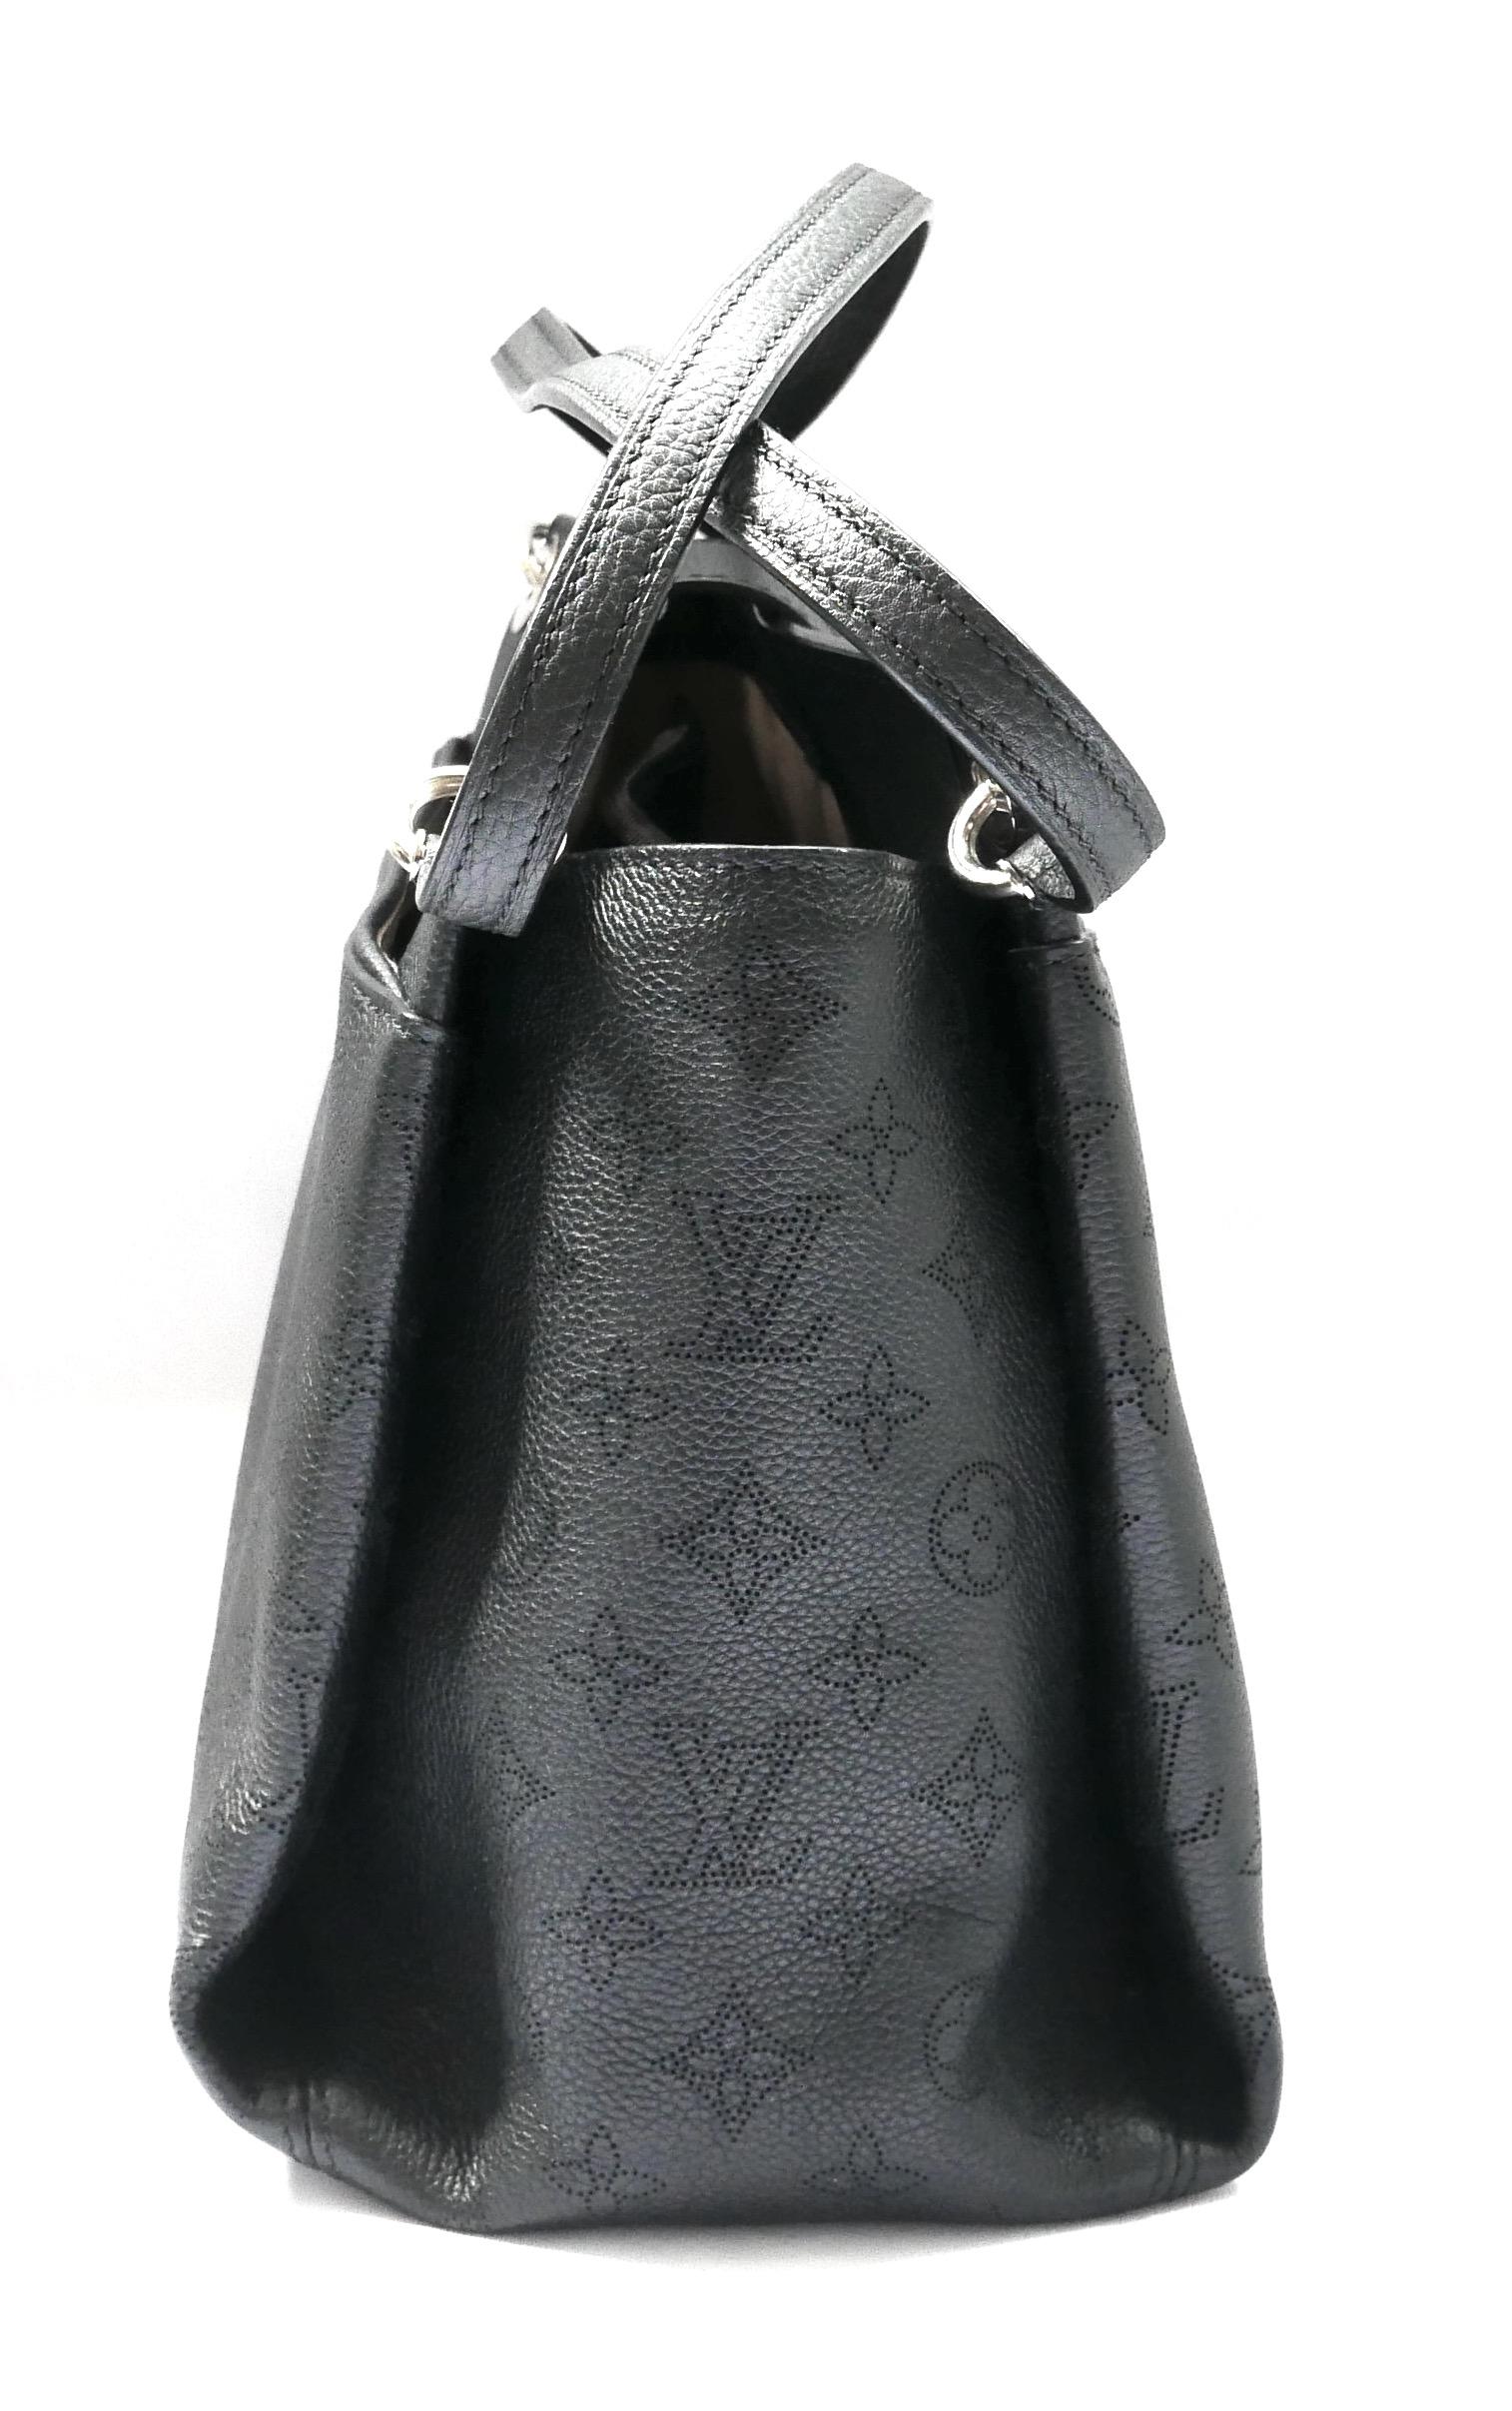 Louis Vuitton Sevres Mahina Noir Bag Black In New Condition For Sale In London, GB